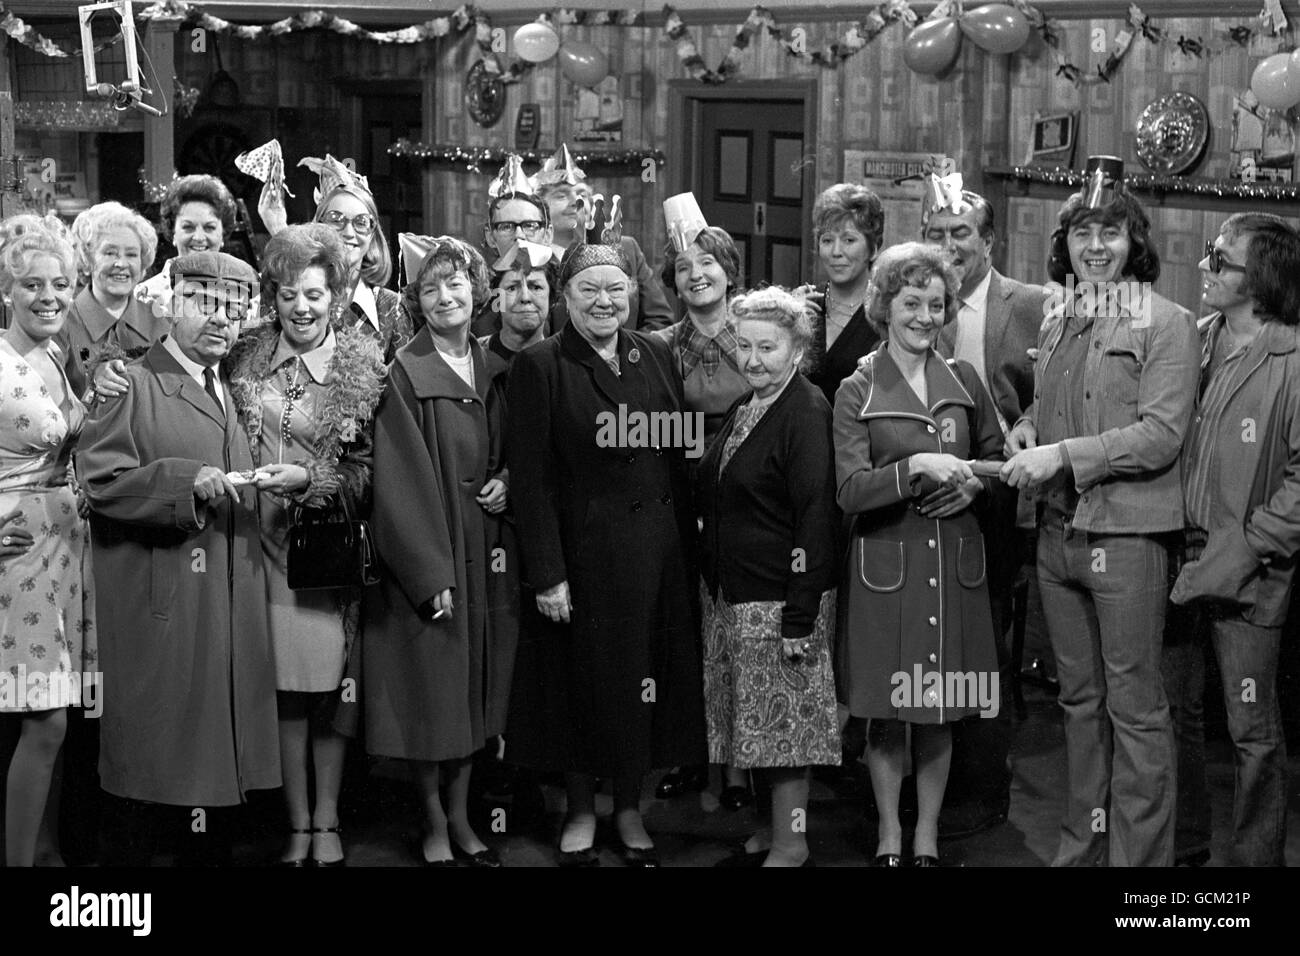 Coronation Street stars during a Christmas Party sequence at the Rovers Return. Left to right, Julie Goodyear as Bet Lynch; Doris Speed as Annie Walker; Jack Howarth as Albert Tatlock; Betty Driver as Betty Turpin (behind); Barbara Knox as Rita Littlewood; Anne Kirkbride as Deidre Hunt (behind), as Jean Alexander as Hilda Ogden; unidentified; Stephen Hancock as Ernest Bishop; as Geoffrey Hughes as Eddie Yeats (at the back); Violet Carson as Ena Sharples; Eileen Derbyshire as Emily Bishop; Margo Bryant as Minnie Caldwell; unidentified; Thelma Barlow as Mavis Riley; Bernard Youens as Stan Stock Photo